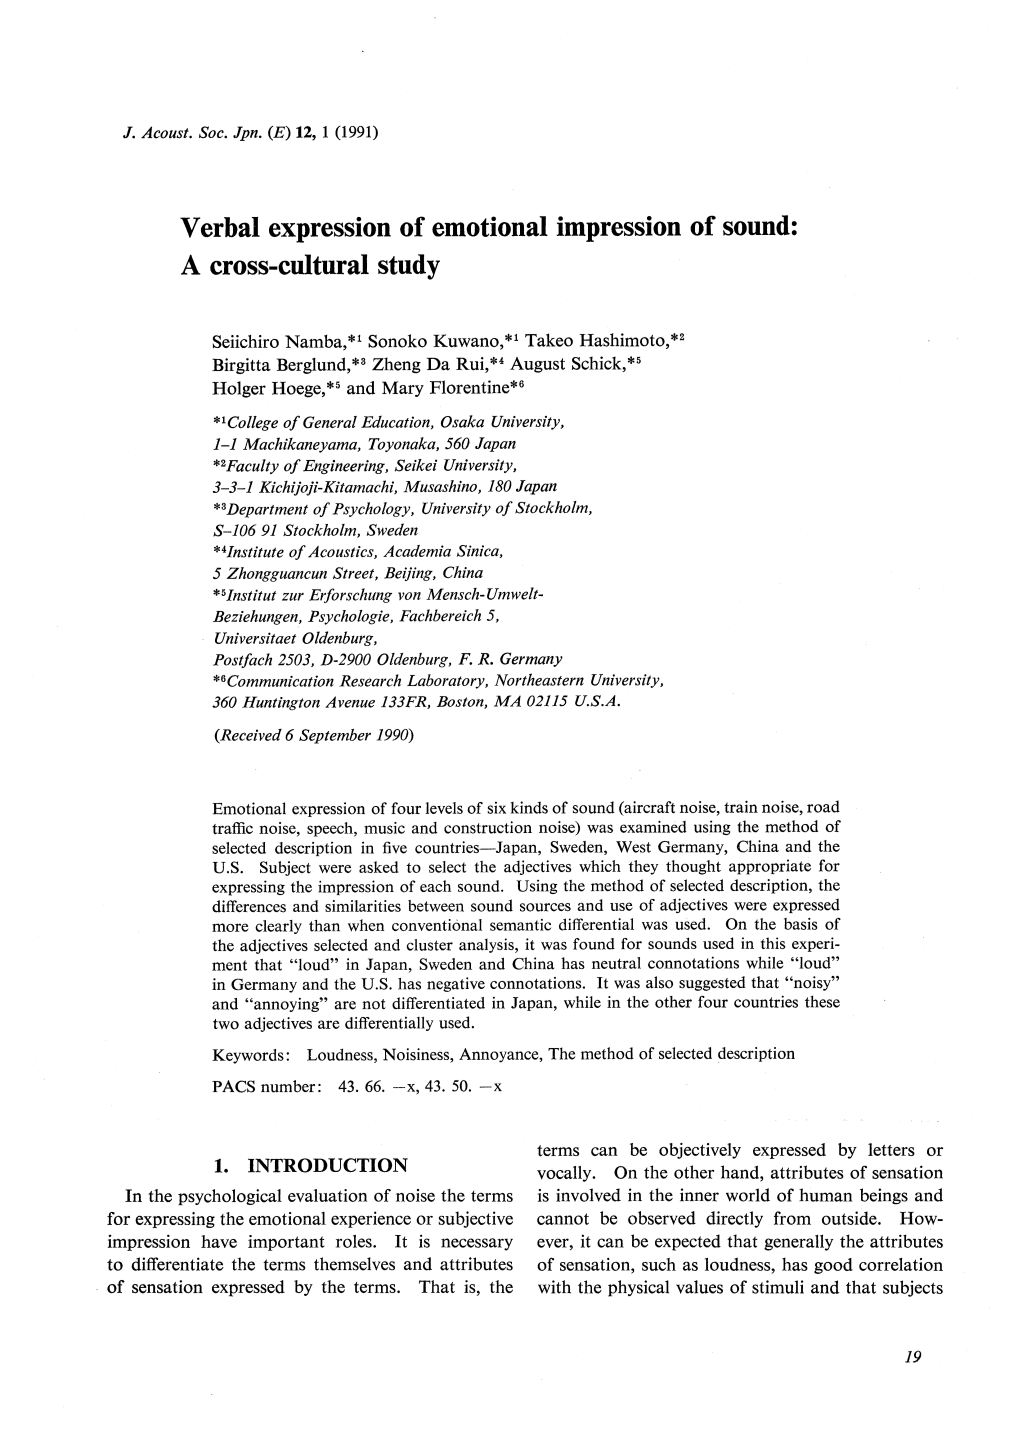 Verbal Expression of Emotional Impression of Sound: a Cross-Cultural Study